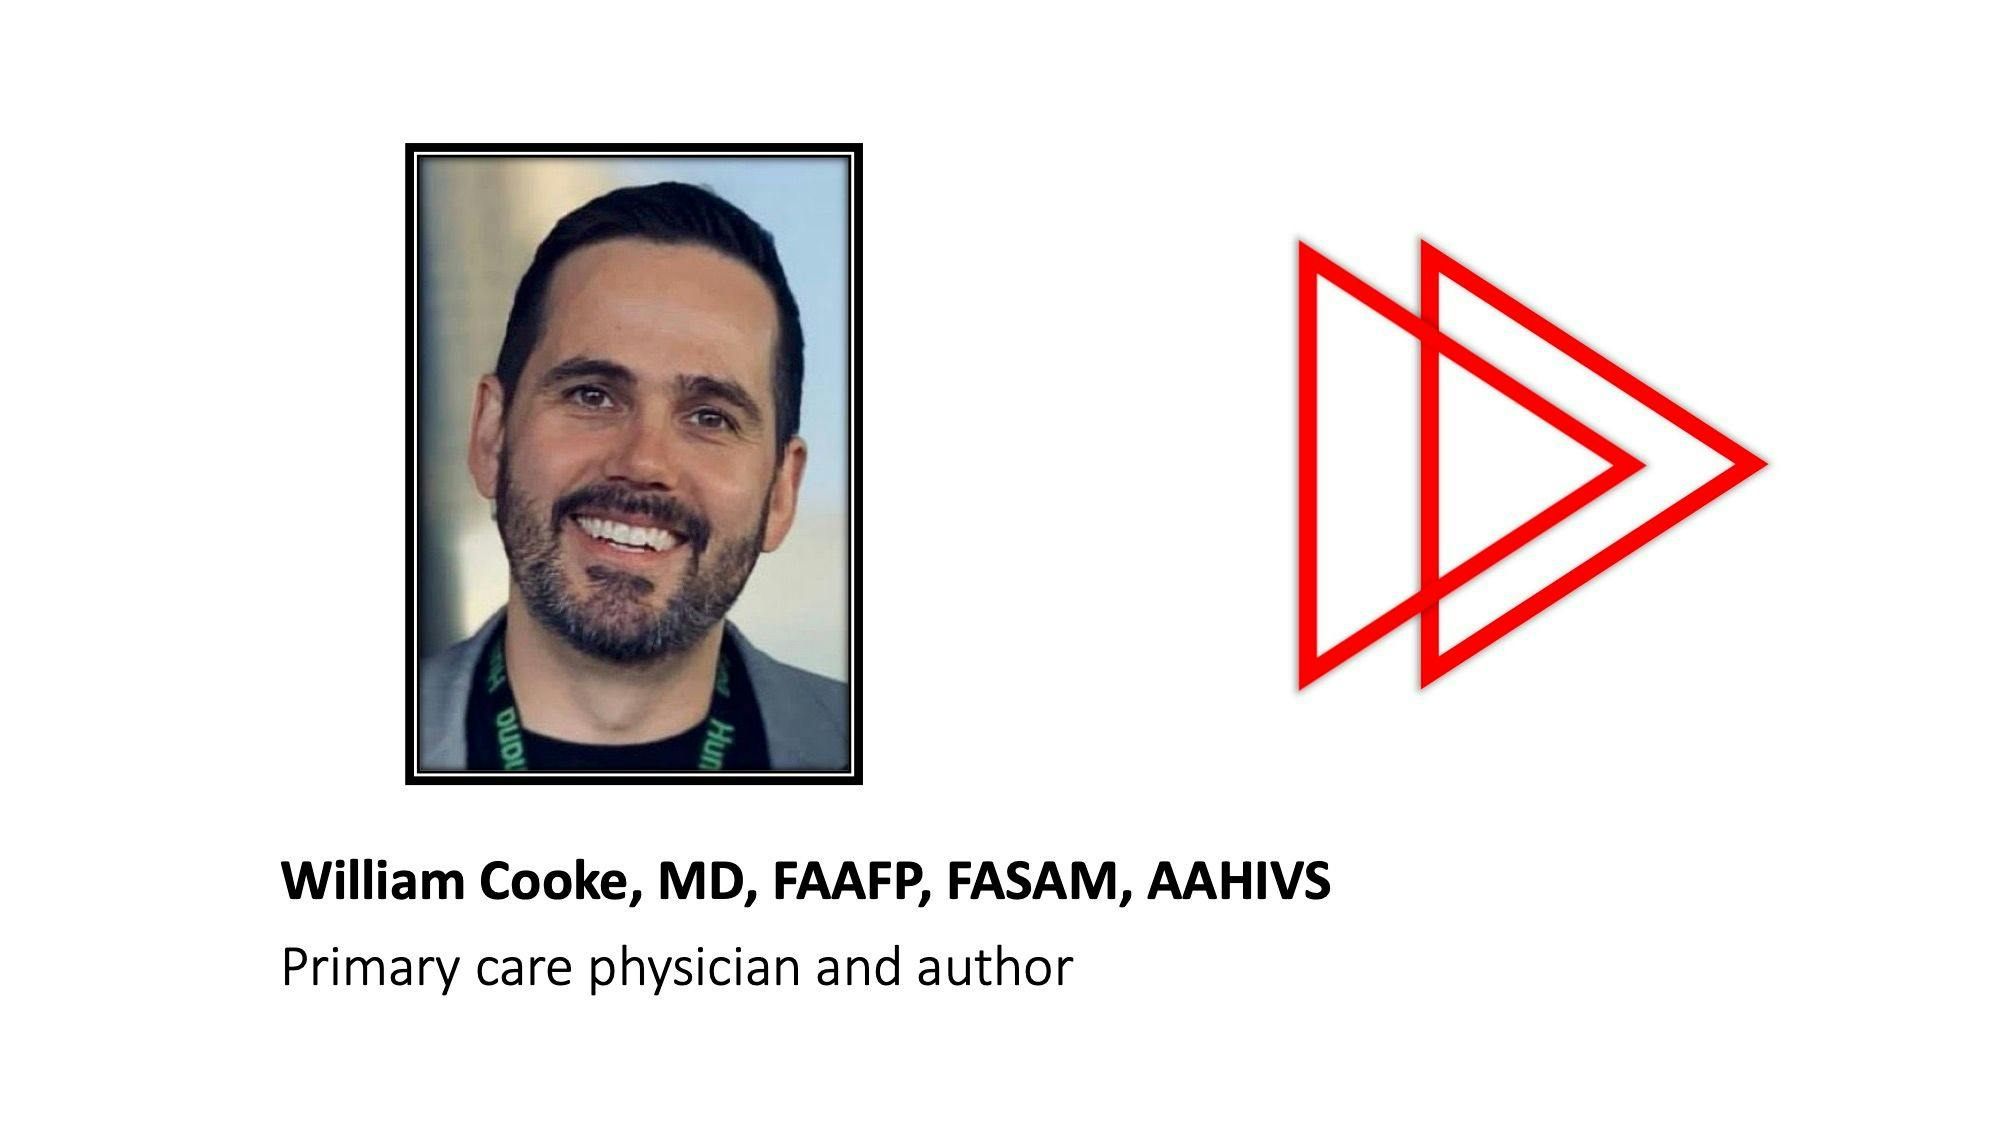 William cooke, MD, FAAFP, FASAM, AAHIVS